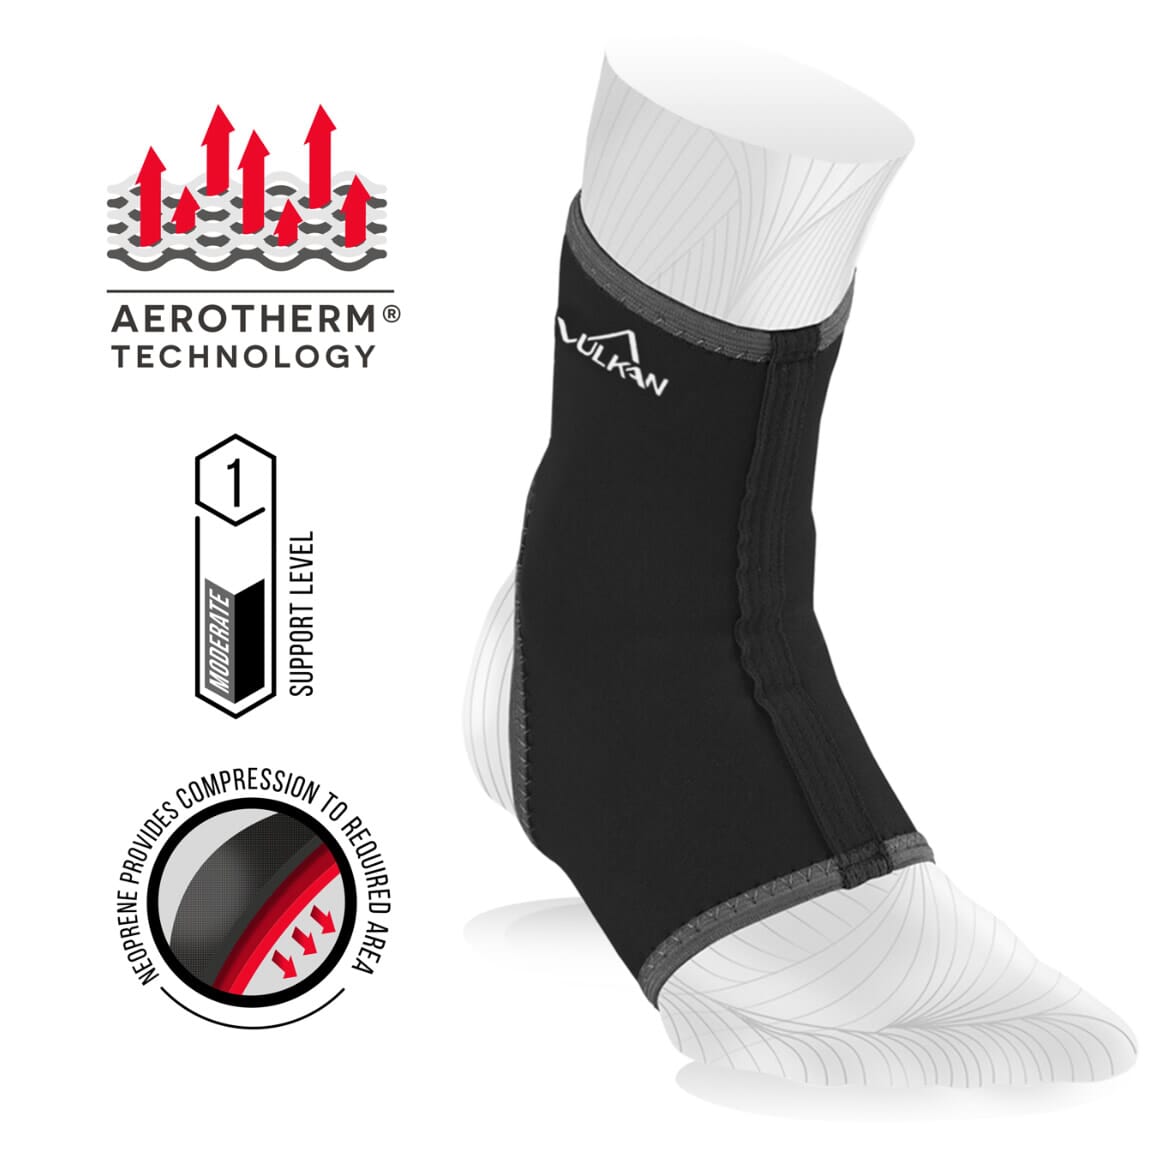 View Ankle Support Vulkan Large information